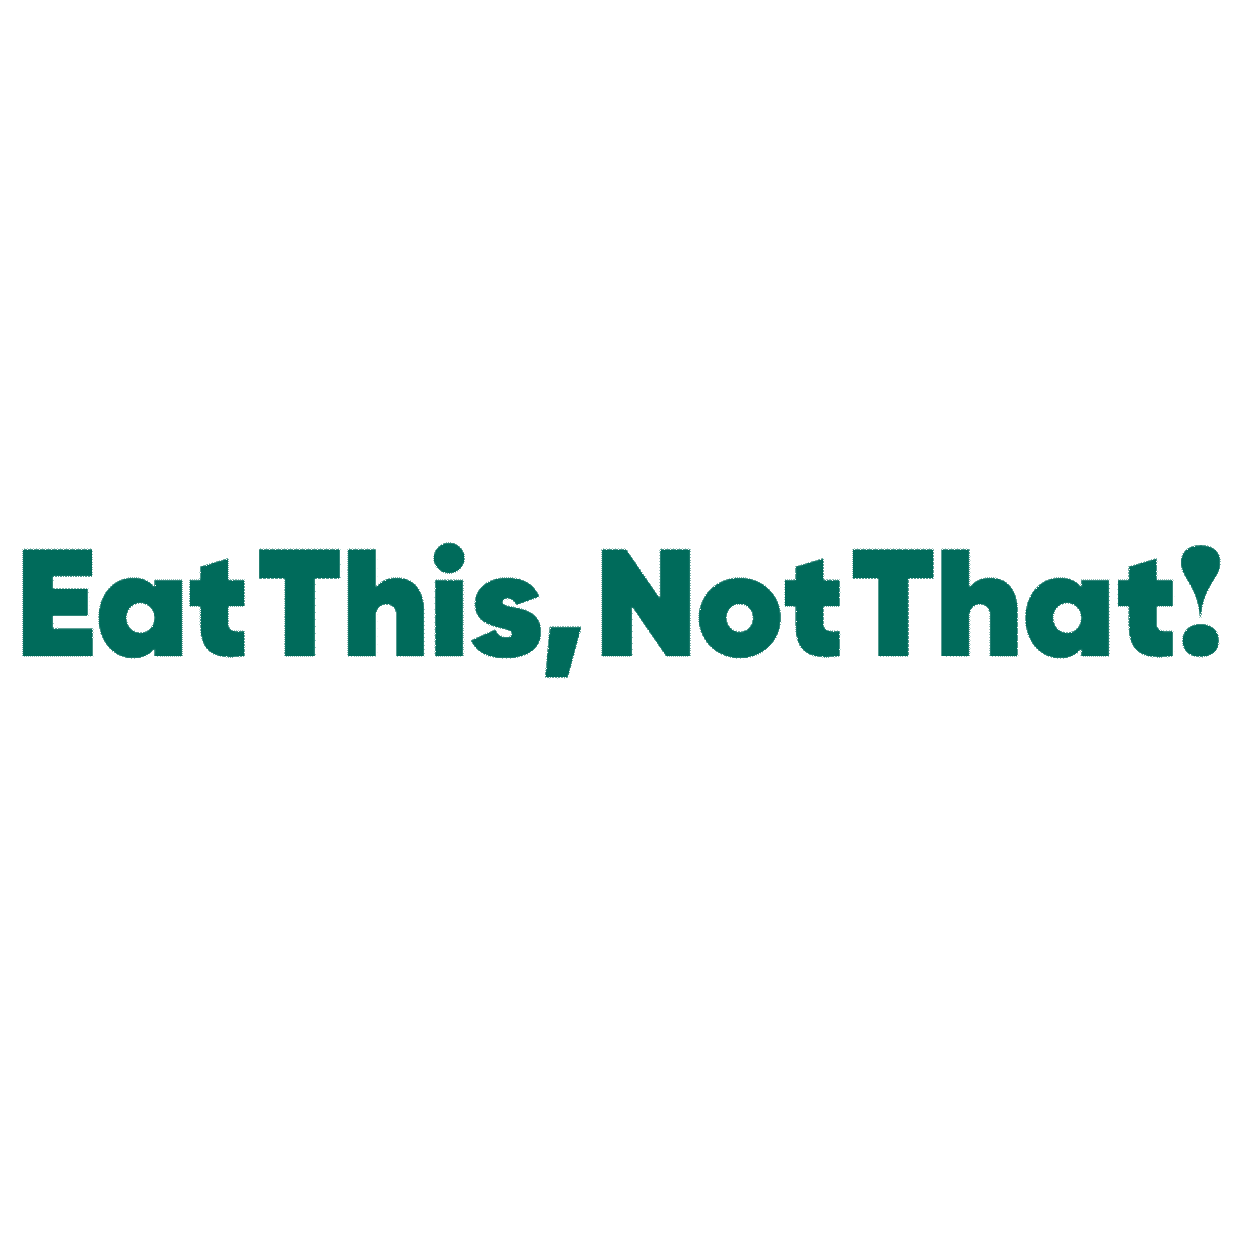 eat this, not that